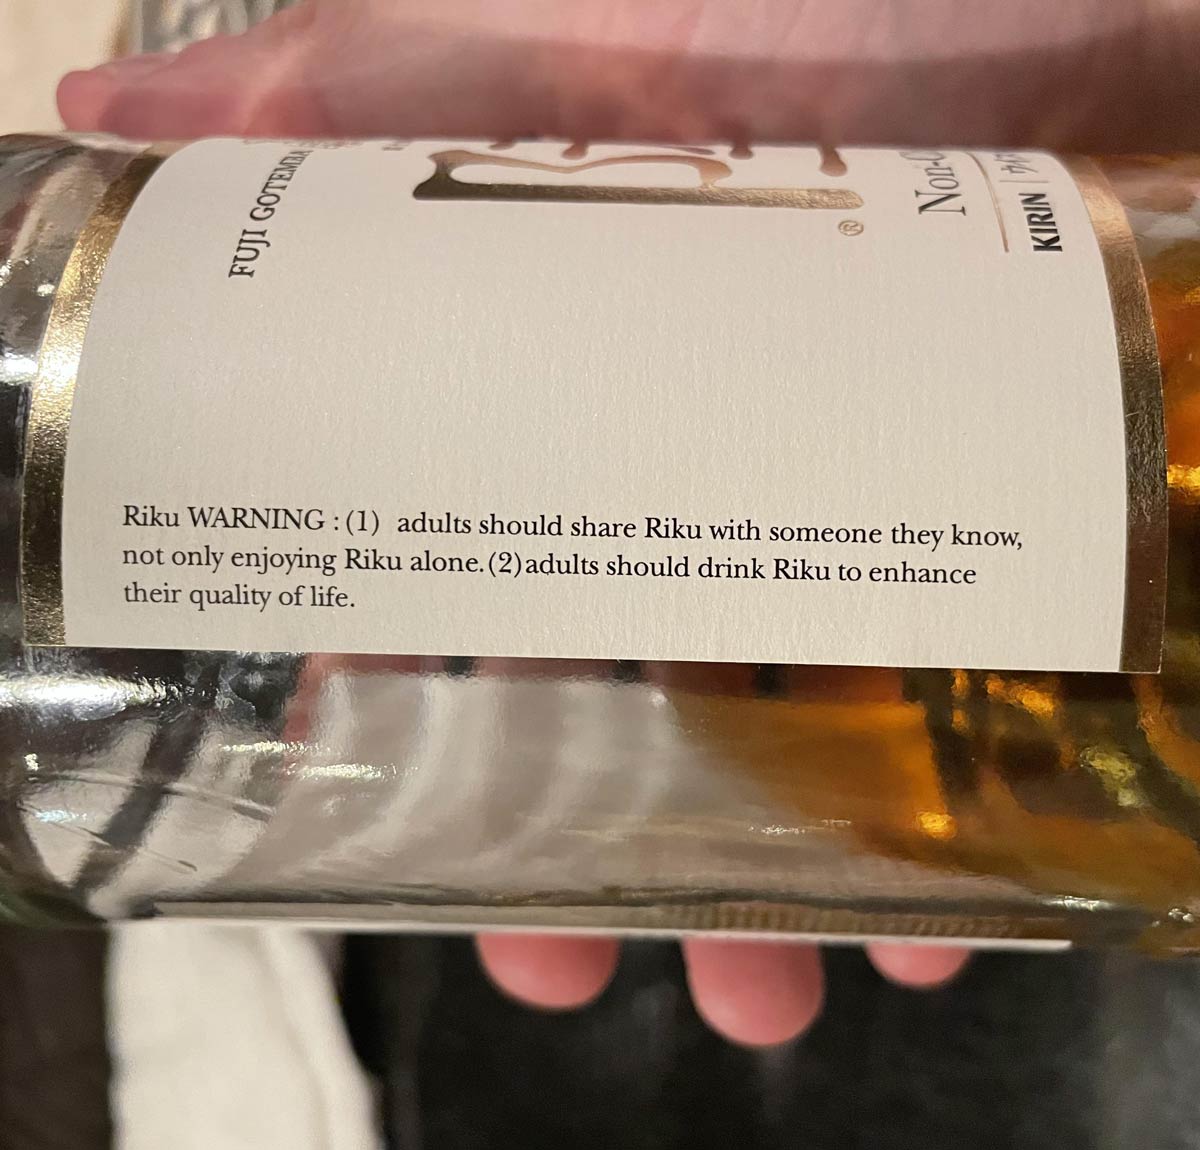 Warning on a bottle of whiskey